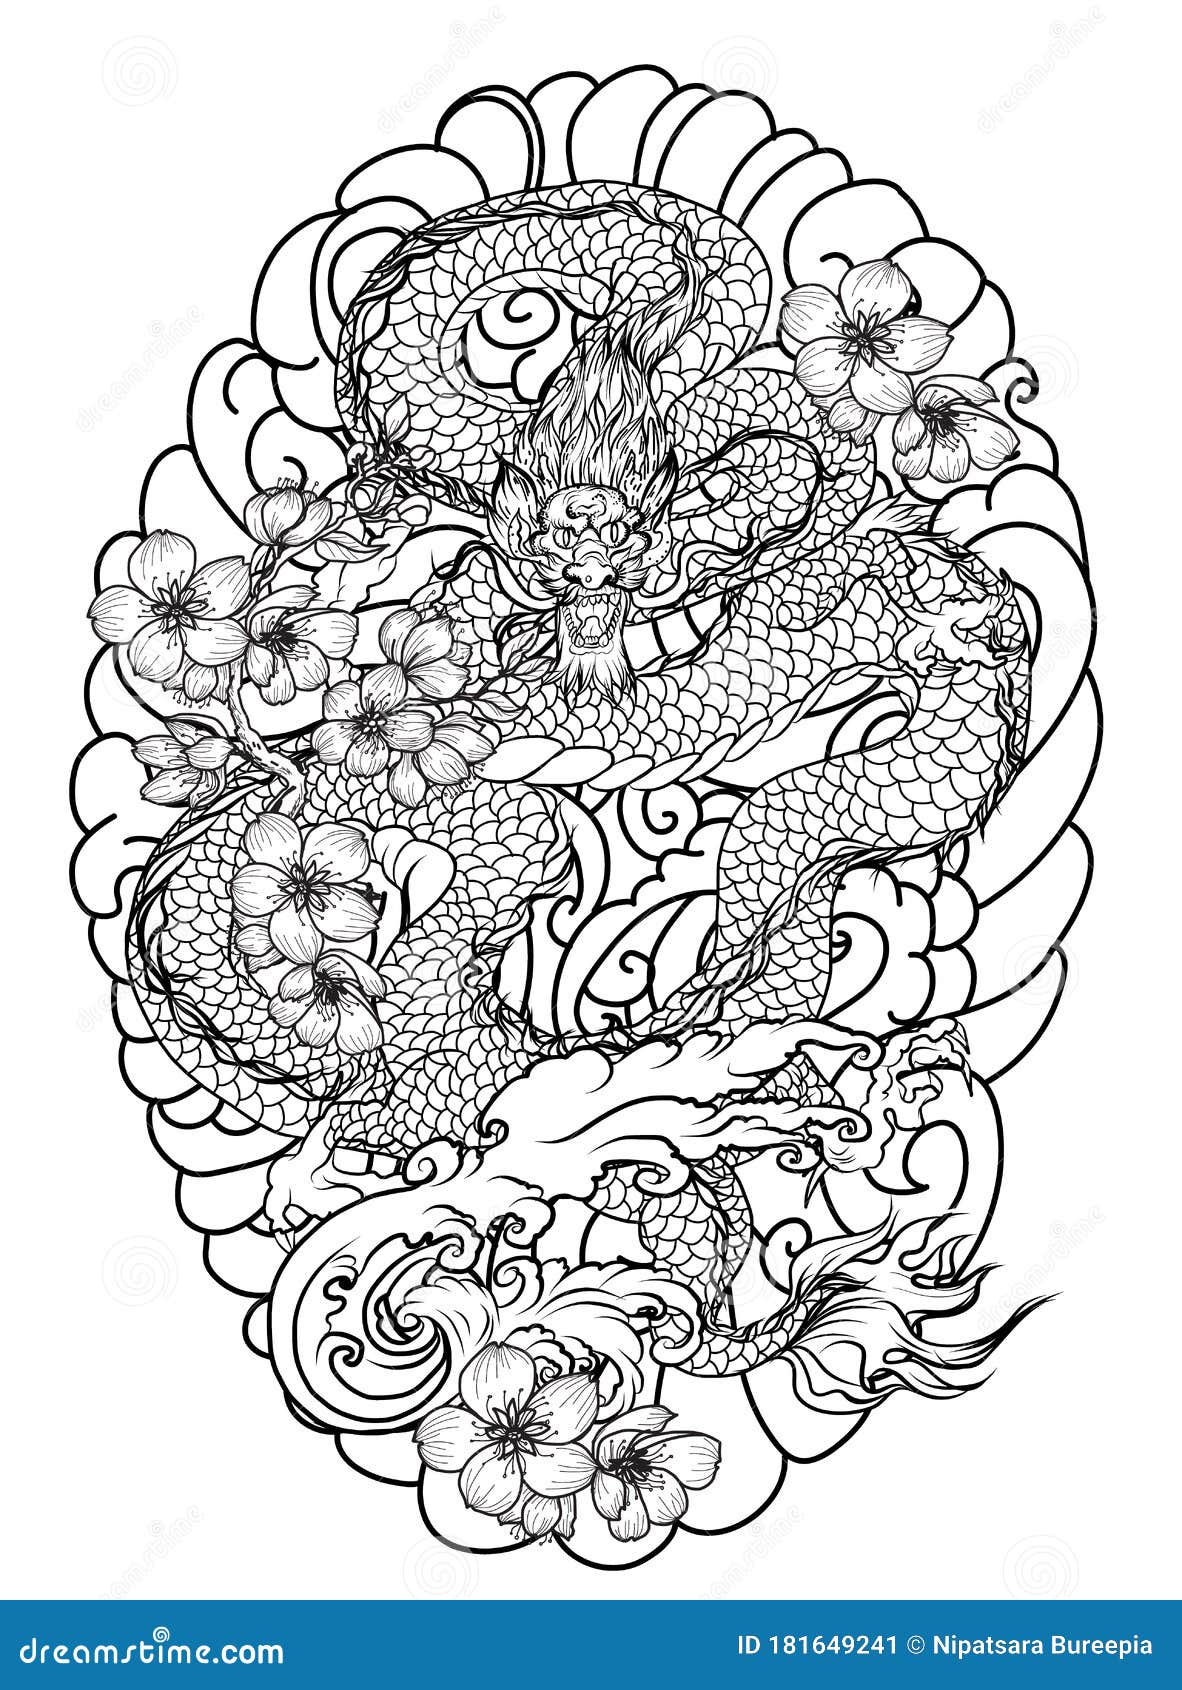 Hand Drawn Dragon Tattoo ,coloring Book Japanese Style.Japanese Old Dragon for Tattoo. Traditional Asian Tattoo the Old Dragon Vec Stock Vector - Illustration of flower, design: 181649241